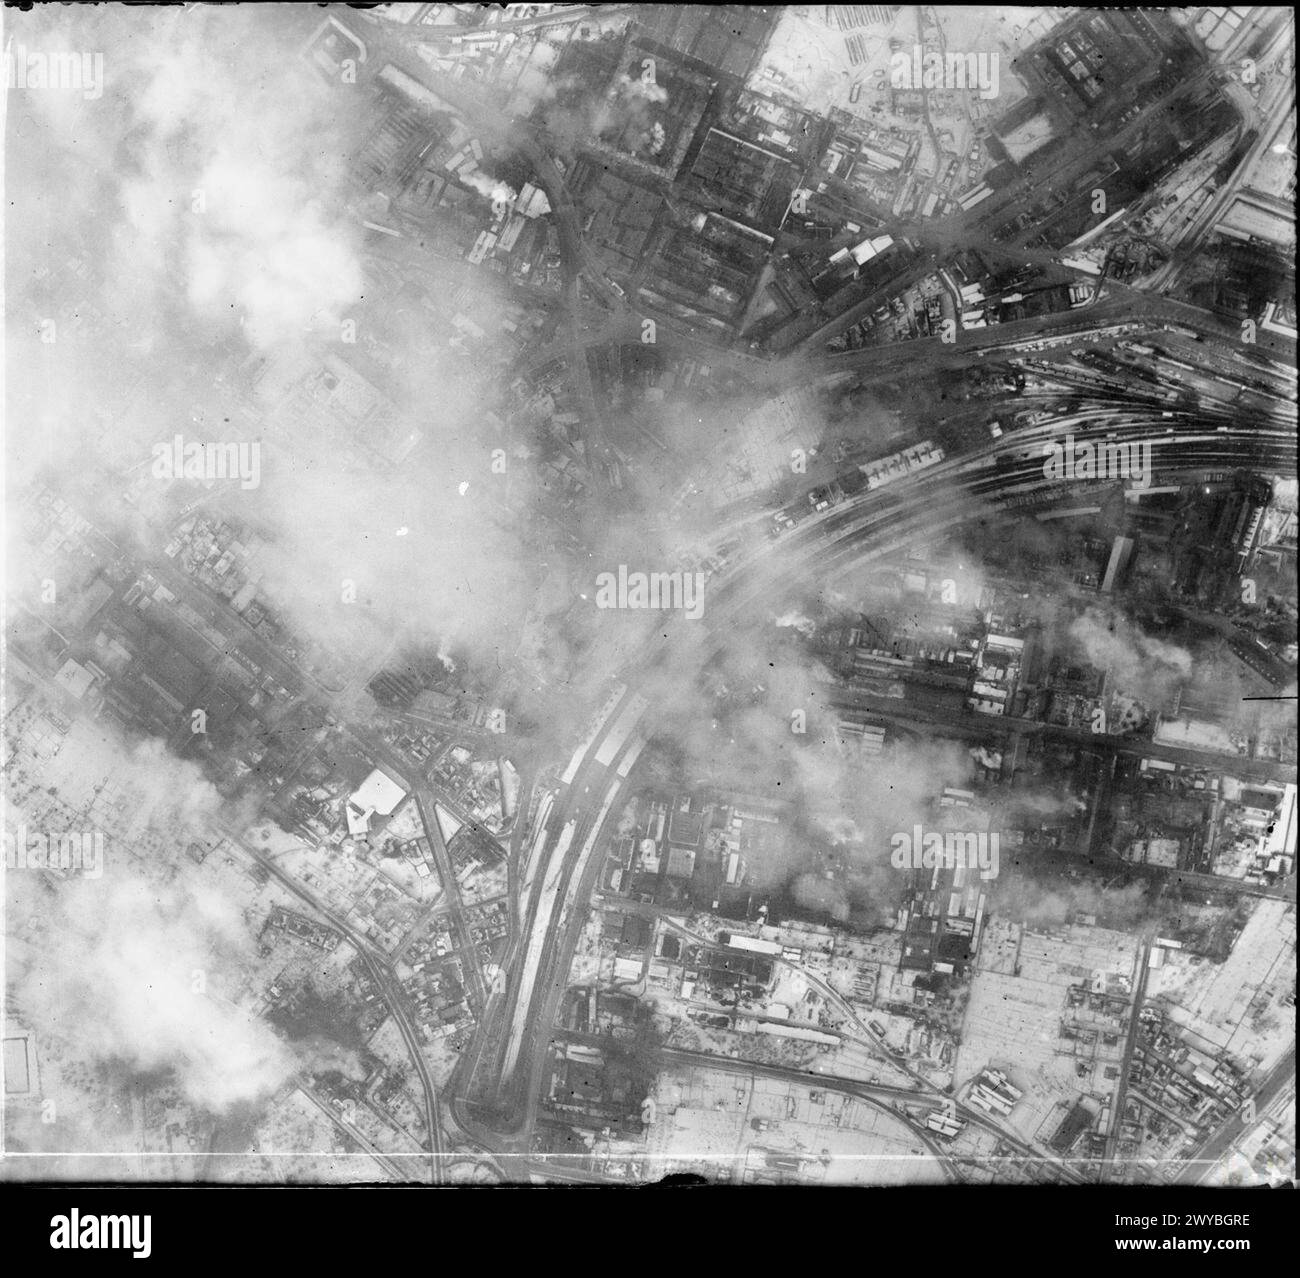 ROYAL AIR FORCE: OPERATIONS BY THE PHOTOGRAPHIC RECONNAISSANCE UNITS, 1939-1945. - Vertical photographic-reconnaissance aerial taken over Stuttgart, Germany following the raid by aircraft of Bomber Command on the night of 20/21 February 1944, showing damaged industrial premises in the Feuerbach district. At top centre can be seen the heavily-damaged ignition equipment plant of Robert Bosch AG, while at centre right smoke still pours from the partially-destroyed works of Leichtmetallbau GmbH. , Royal Air Force, Expeditionary Air Wing, 904 Stock Photo